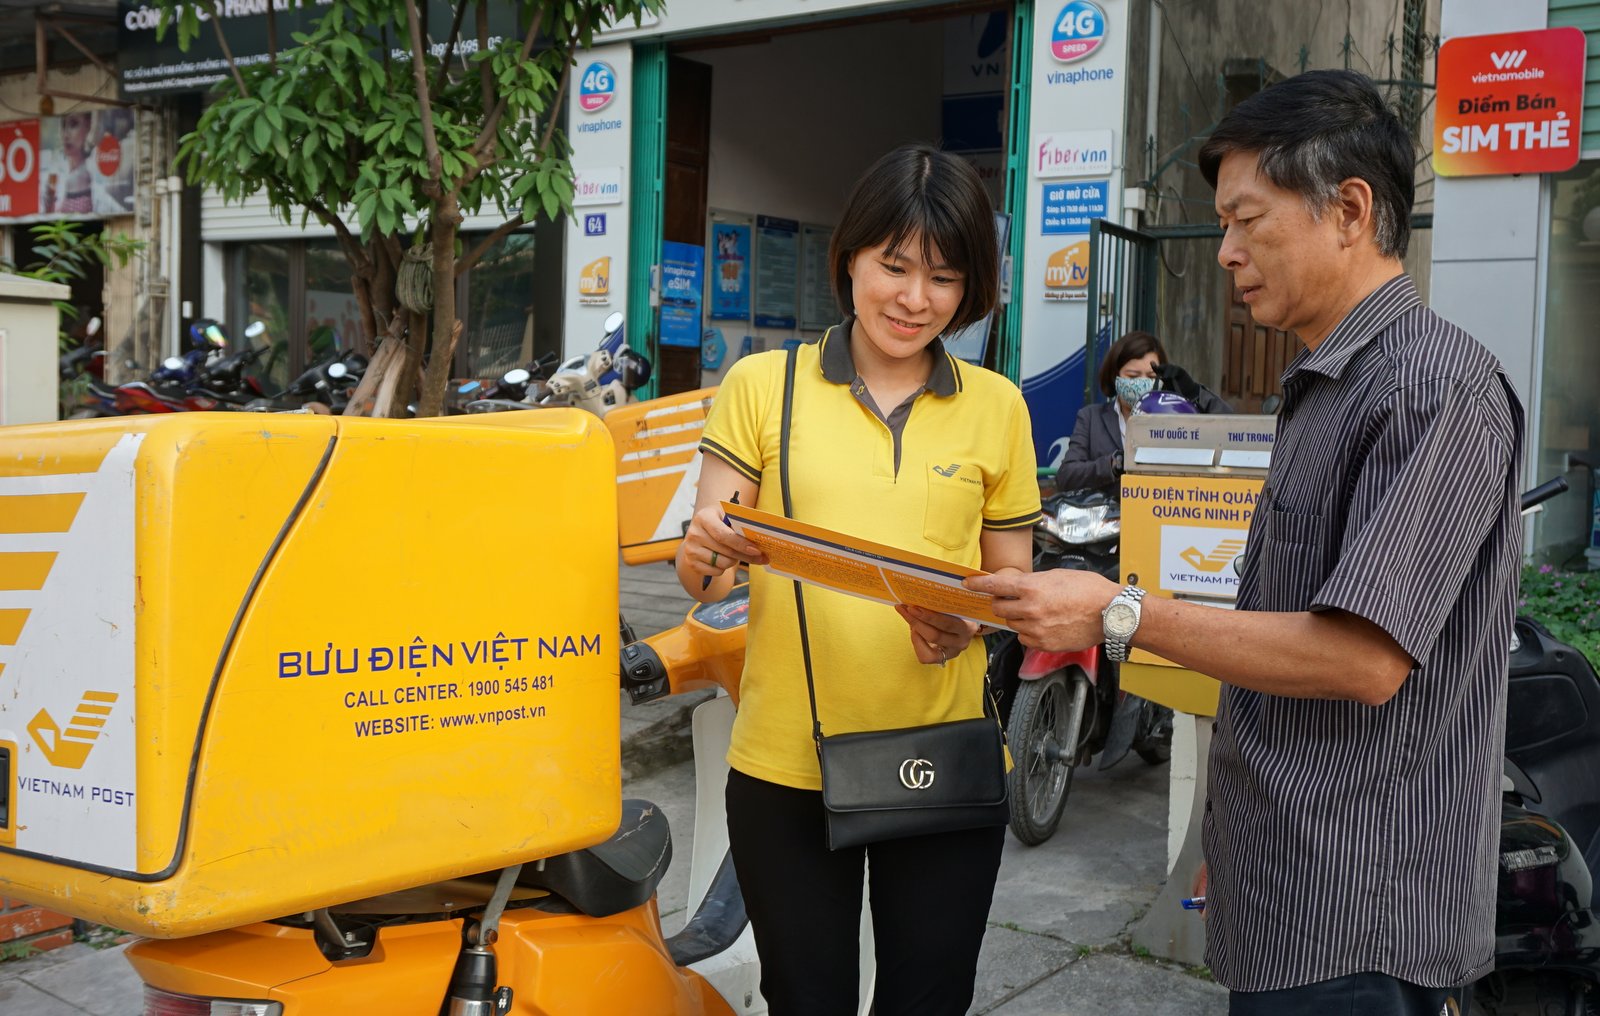 Rights and obligations of postal service users in Vietnam